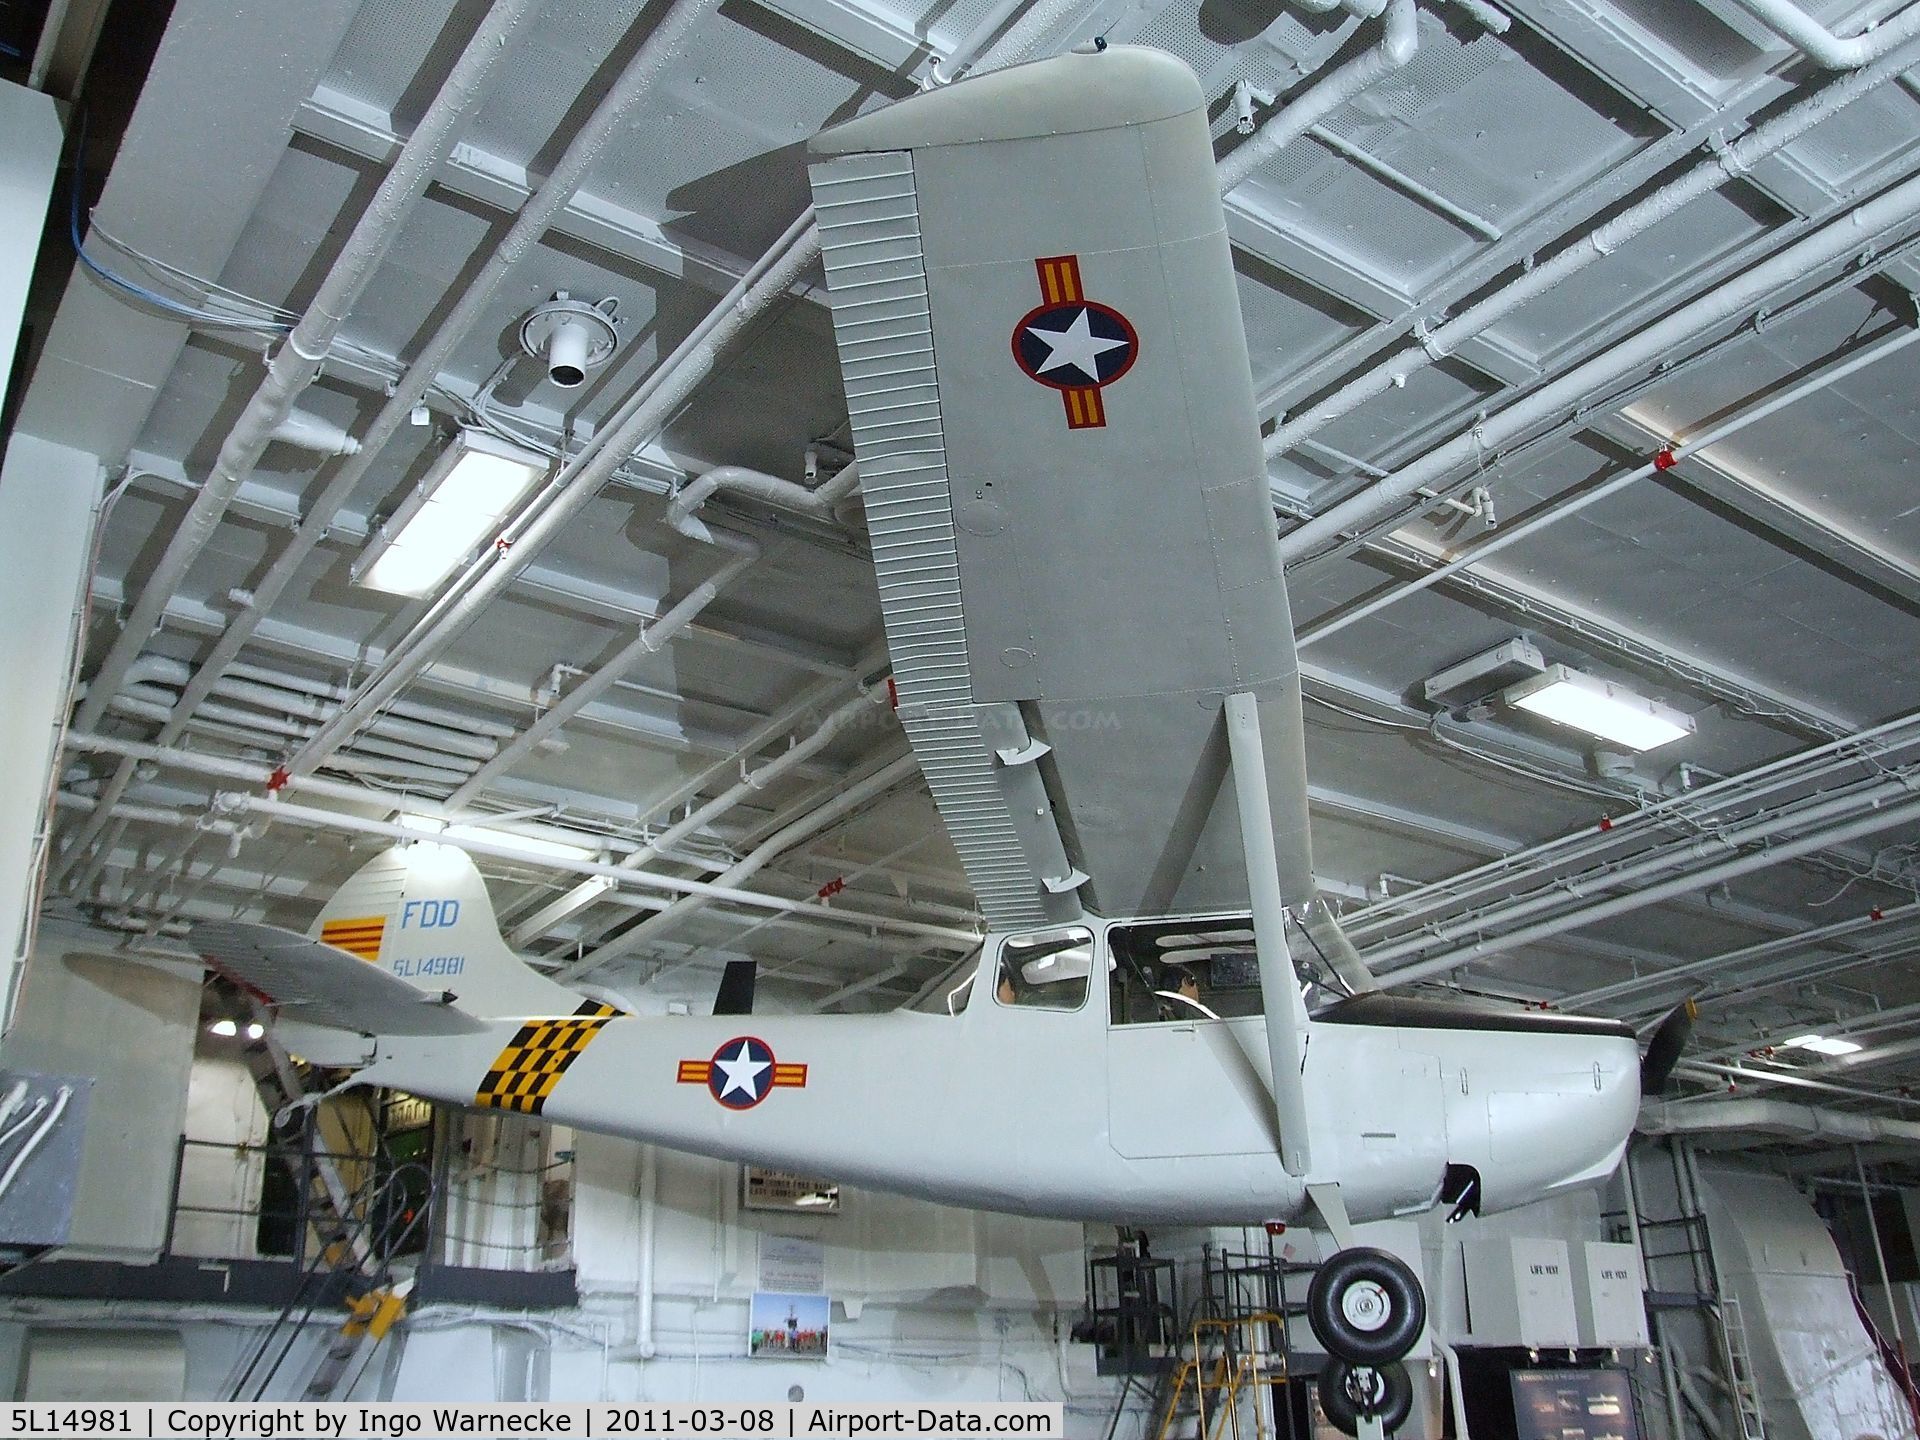 5L14981, 1950 Cessna O-1A Bird Dog C/N 21866, Cessna 305A / L-19A / O-1A Bird Dog in the hangar of the USS Midway Museum, San Diego CA